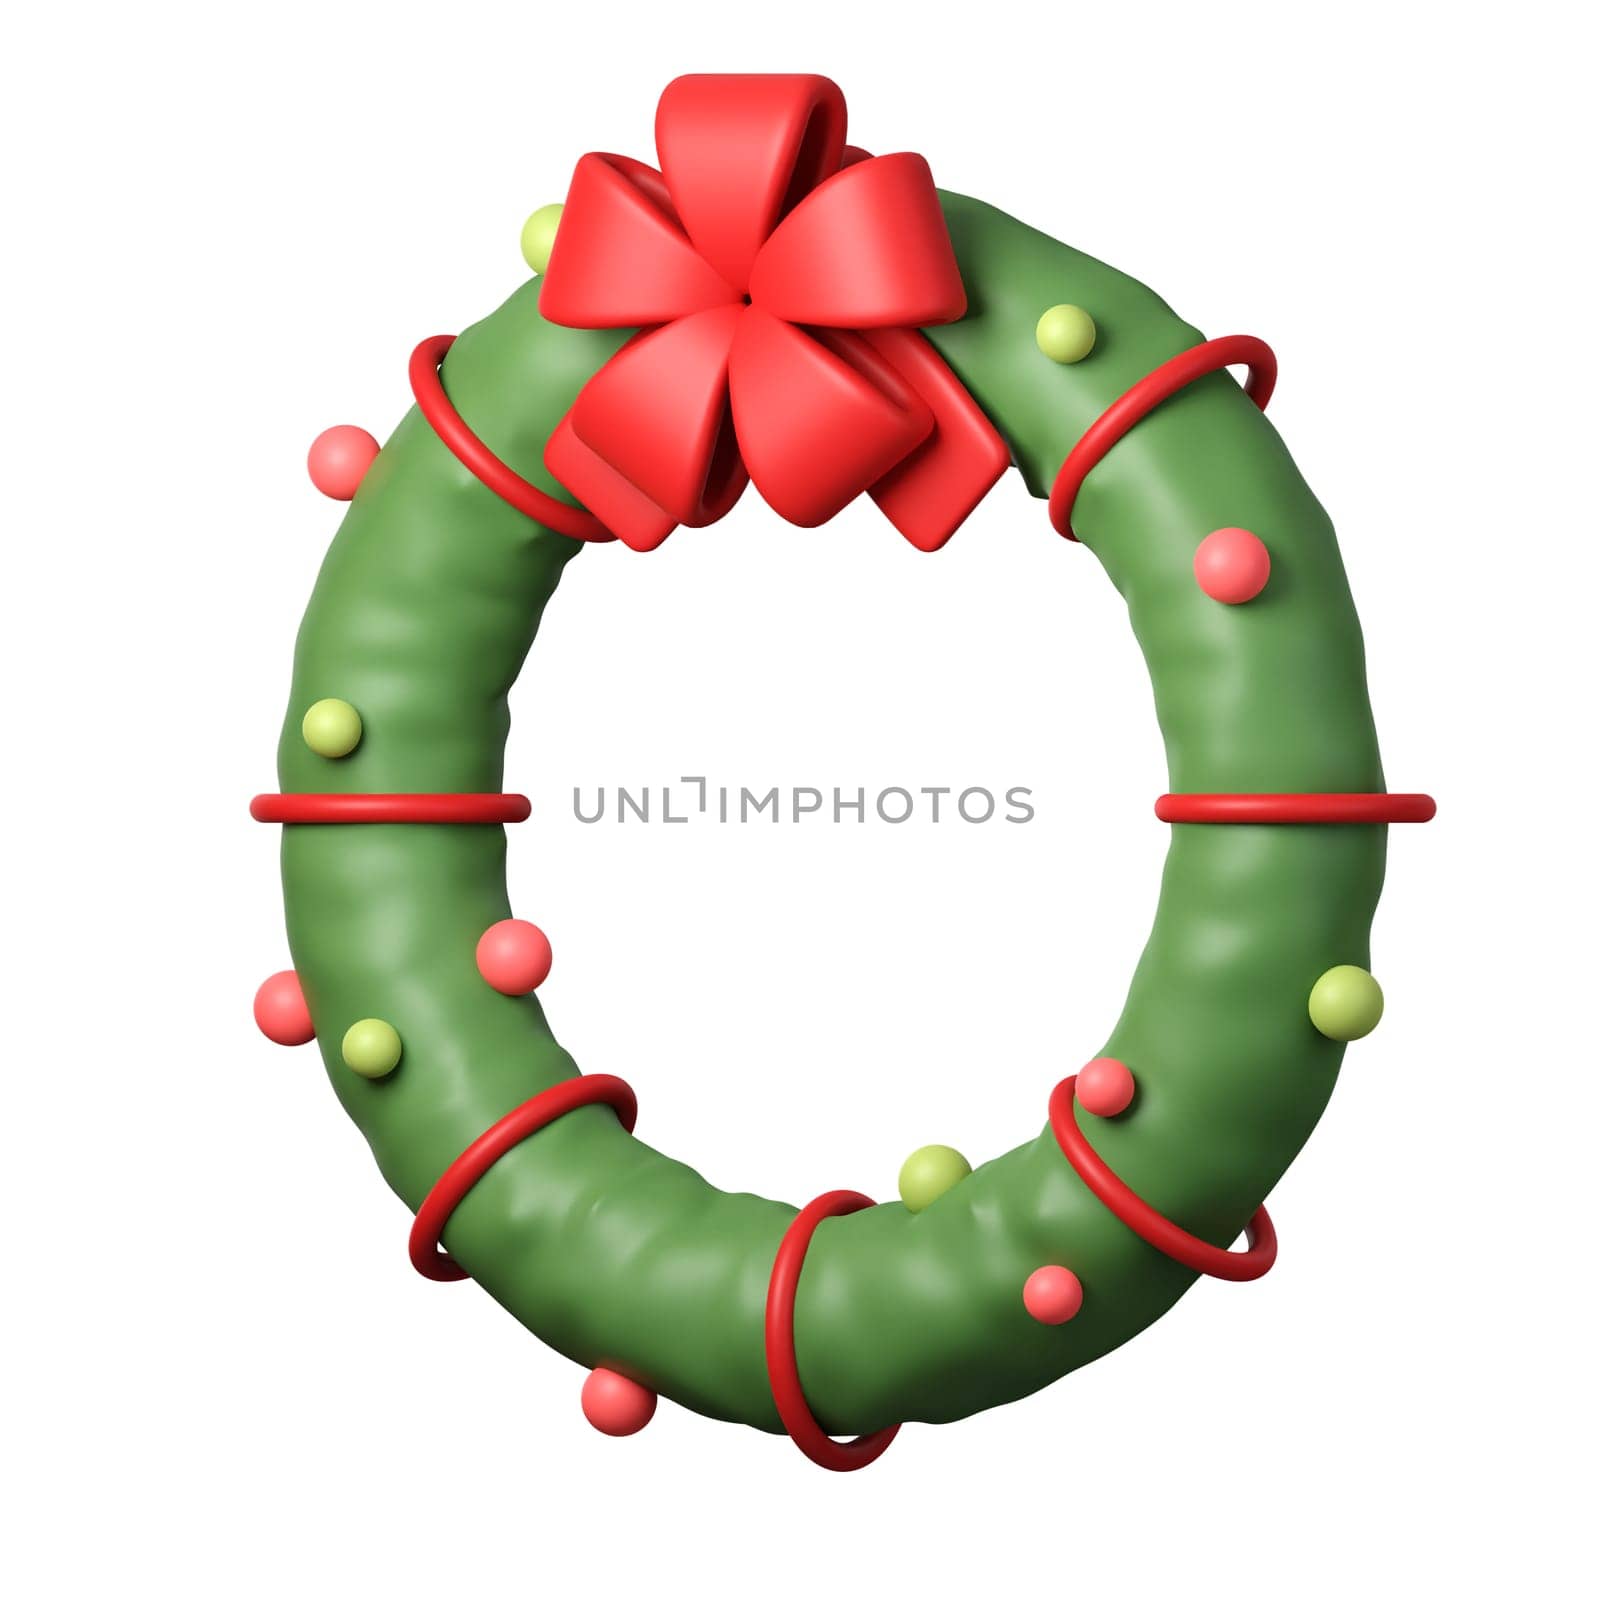 3d Christmas wreath icon. minimal decorative festive conical shape tree. New Year's holiday decor. 3d design element In cartoon style. Icon isolated on white background. 3d illustration by meepiangraphic